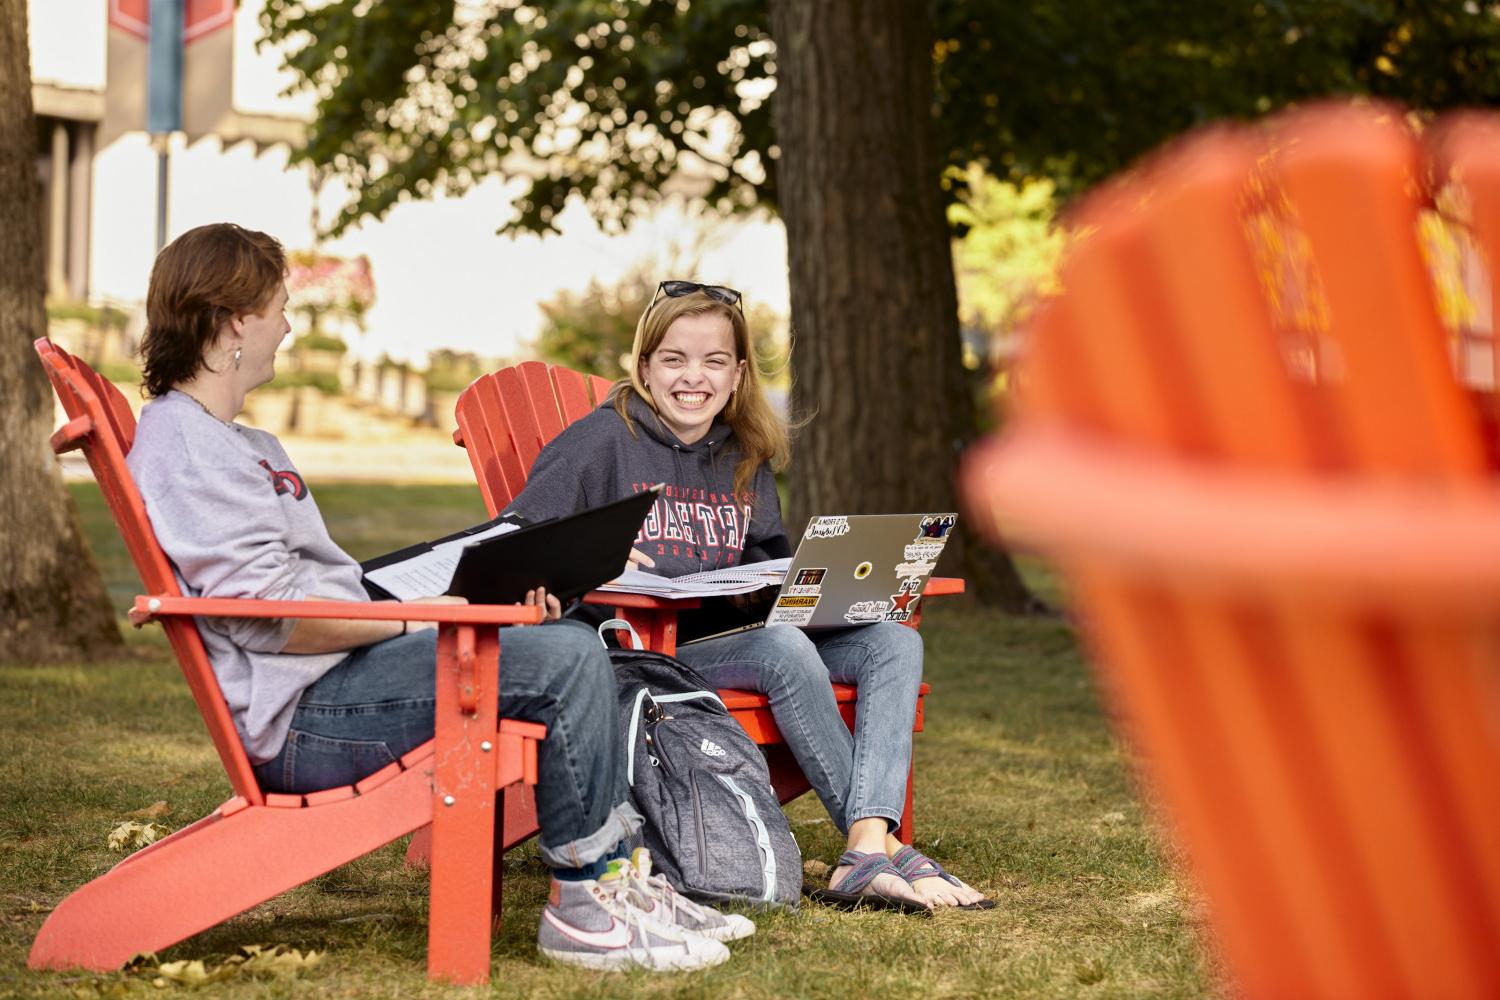 Students hang out in the red Adirondack chairs between classes.